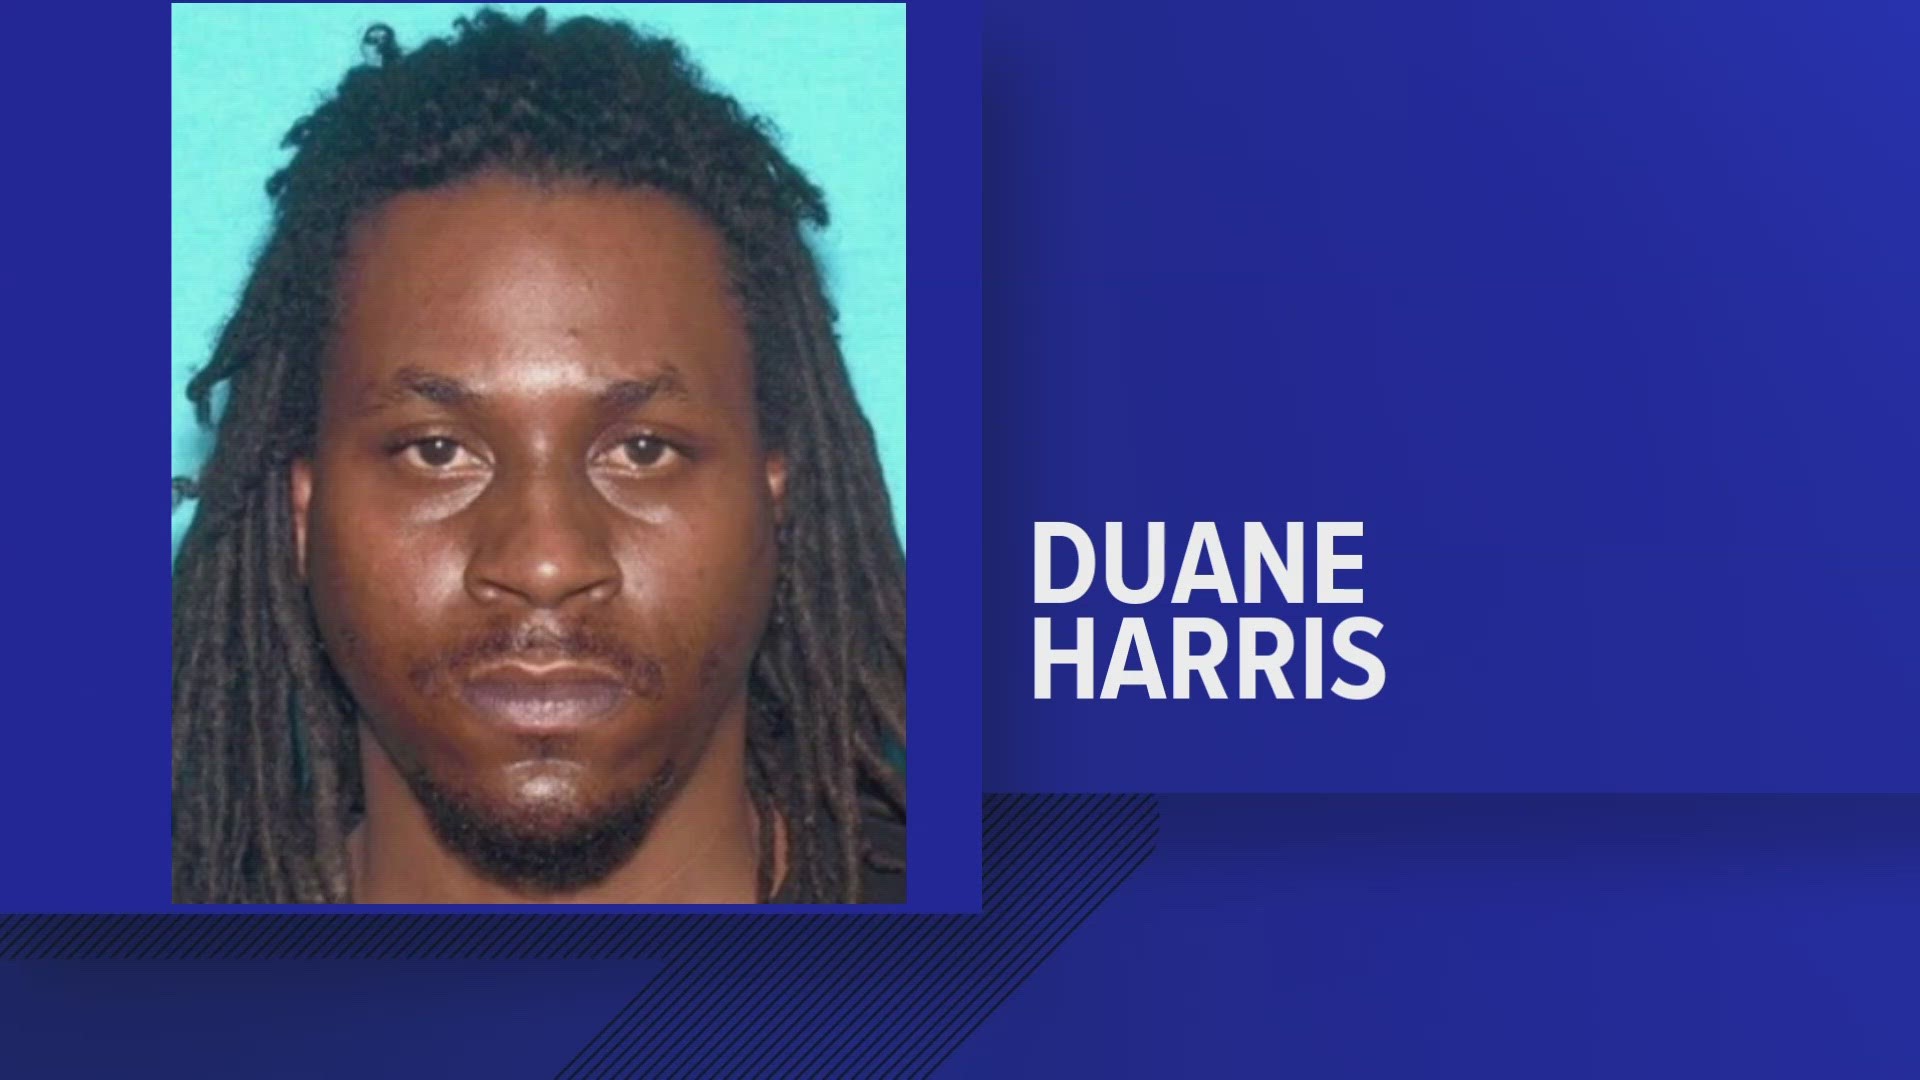 KPD said Duane Harris, 37, was last known to live in Chattanooga.